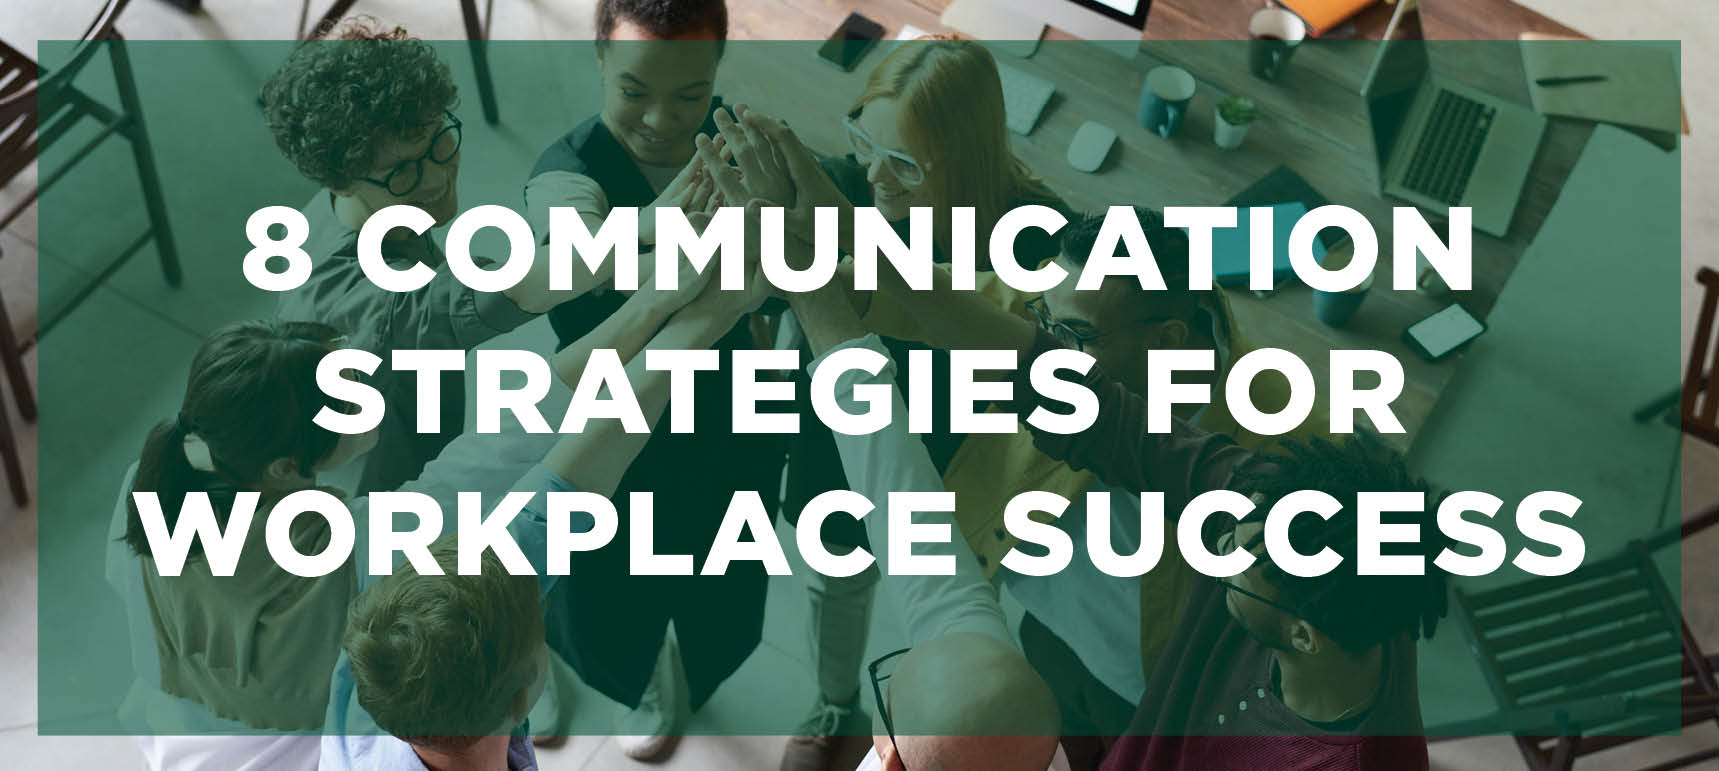 Learn more about the 8 Communications Strategies for Workplace Success program.